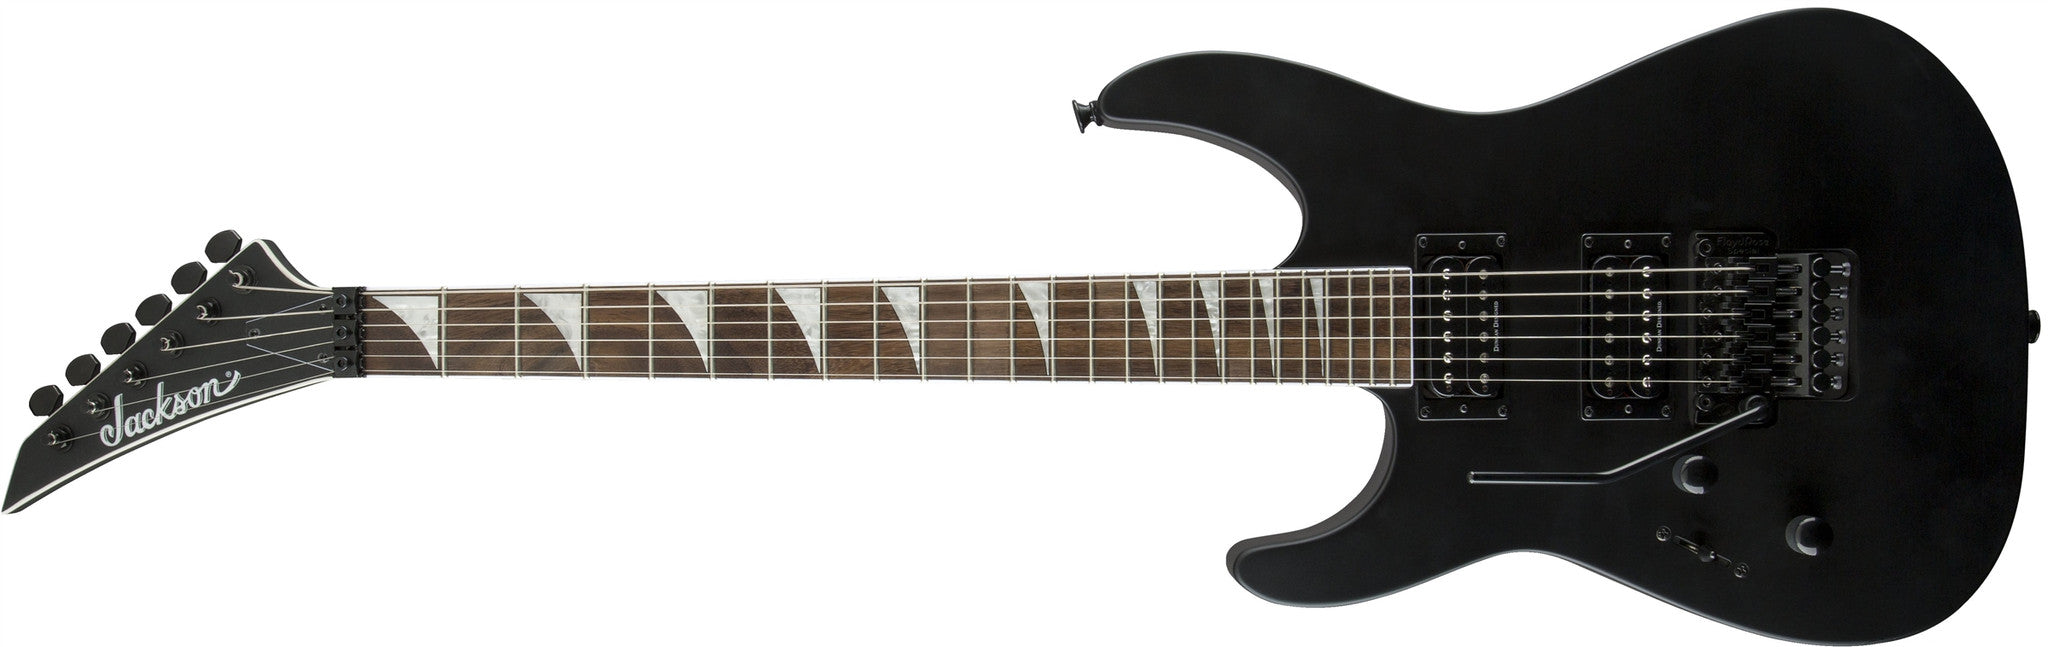 Jackson SLX Soloist Left-Handed, Rosewood Fingerboard, Satin Black 2916343568 - L.A. Music - Canada's Favourite Music Store!